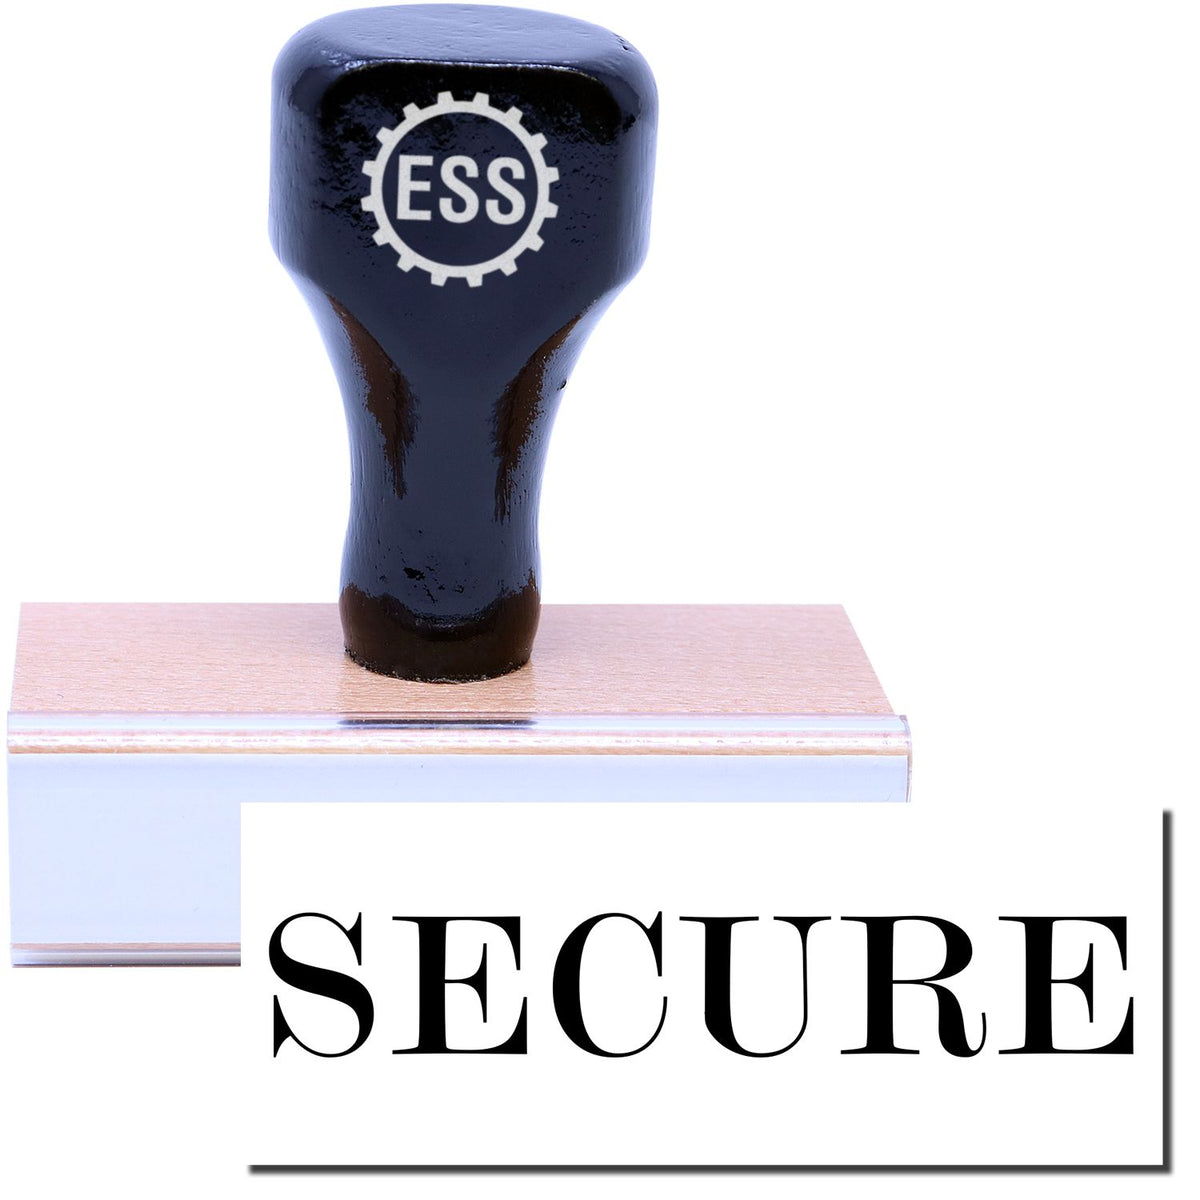 A stock office rubber stamp with a stamped image showing how the text &quot;SECURE&quot; in a large font is displayed after stamping.